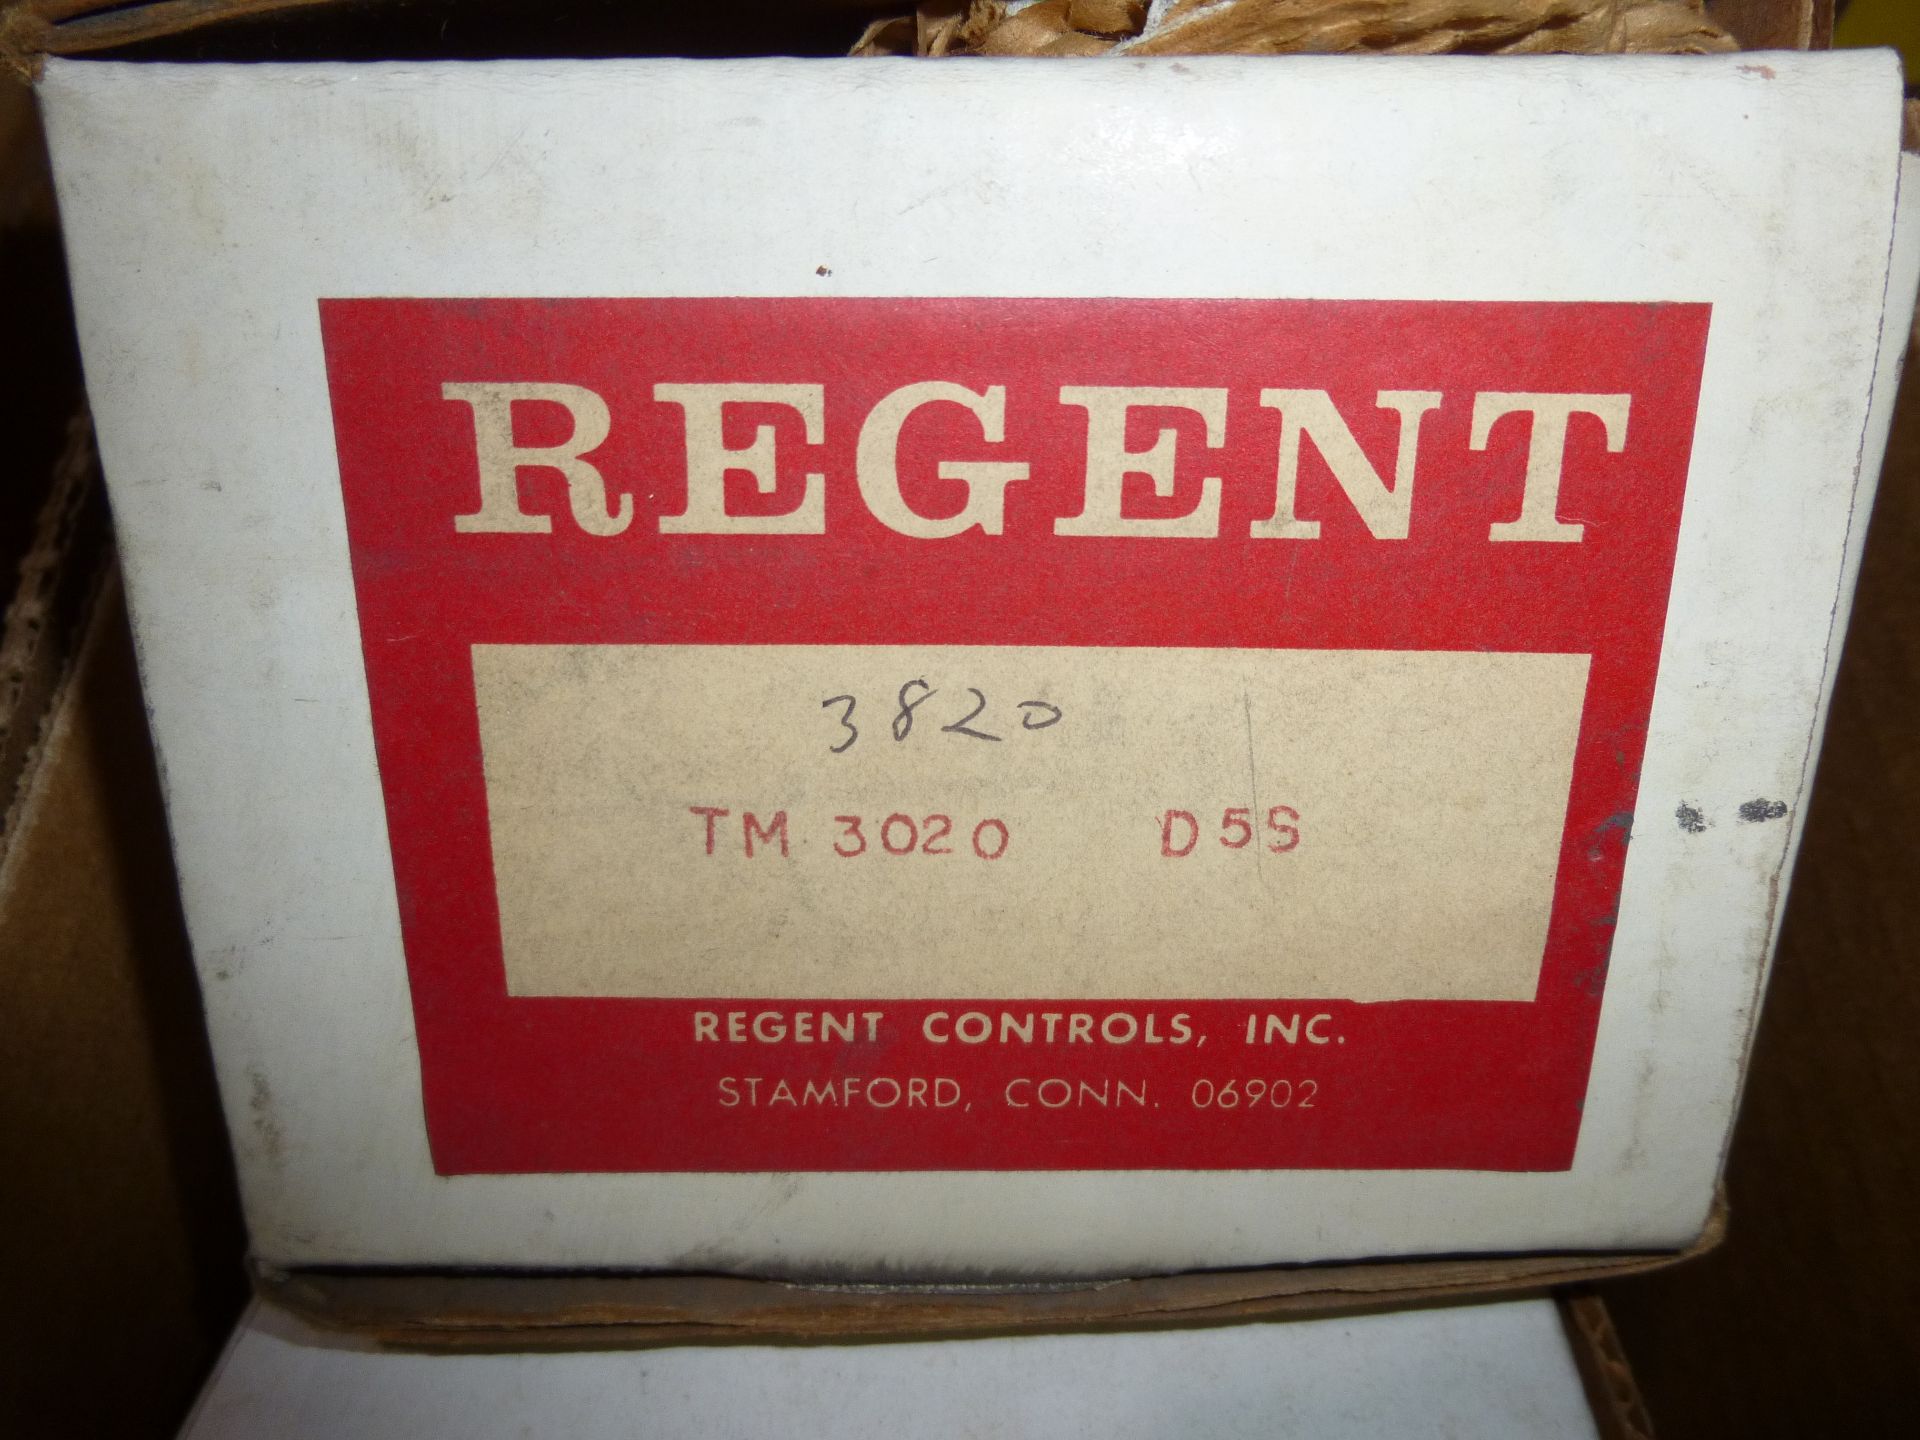 Qty 2 Regent model TM-3020-D5S, new in boxes, as always with Brolyn LLC auctions, all lots can be - Image 2 of 2